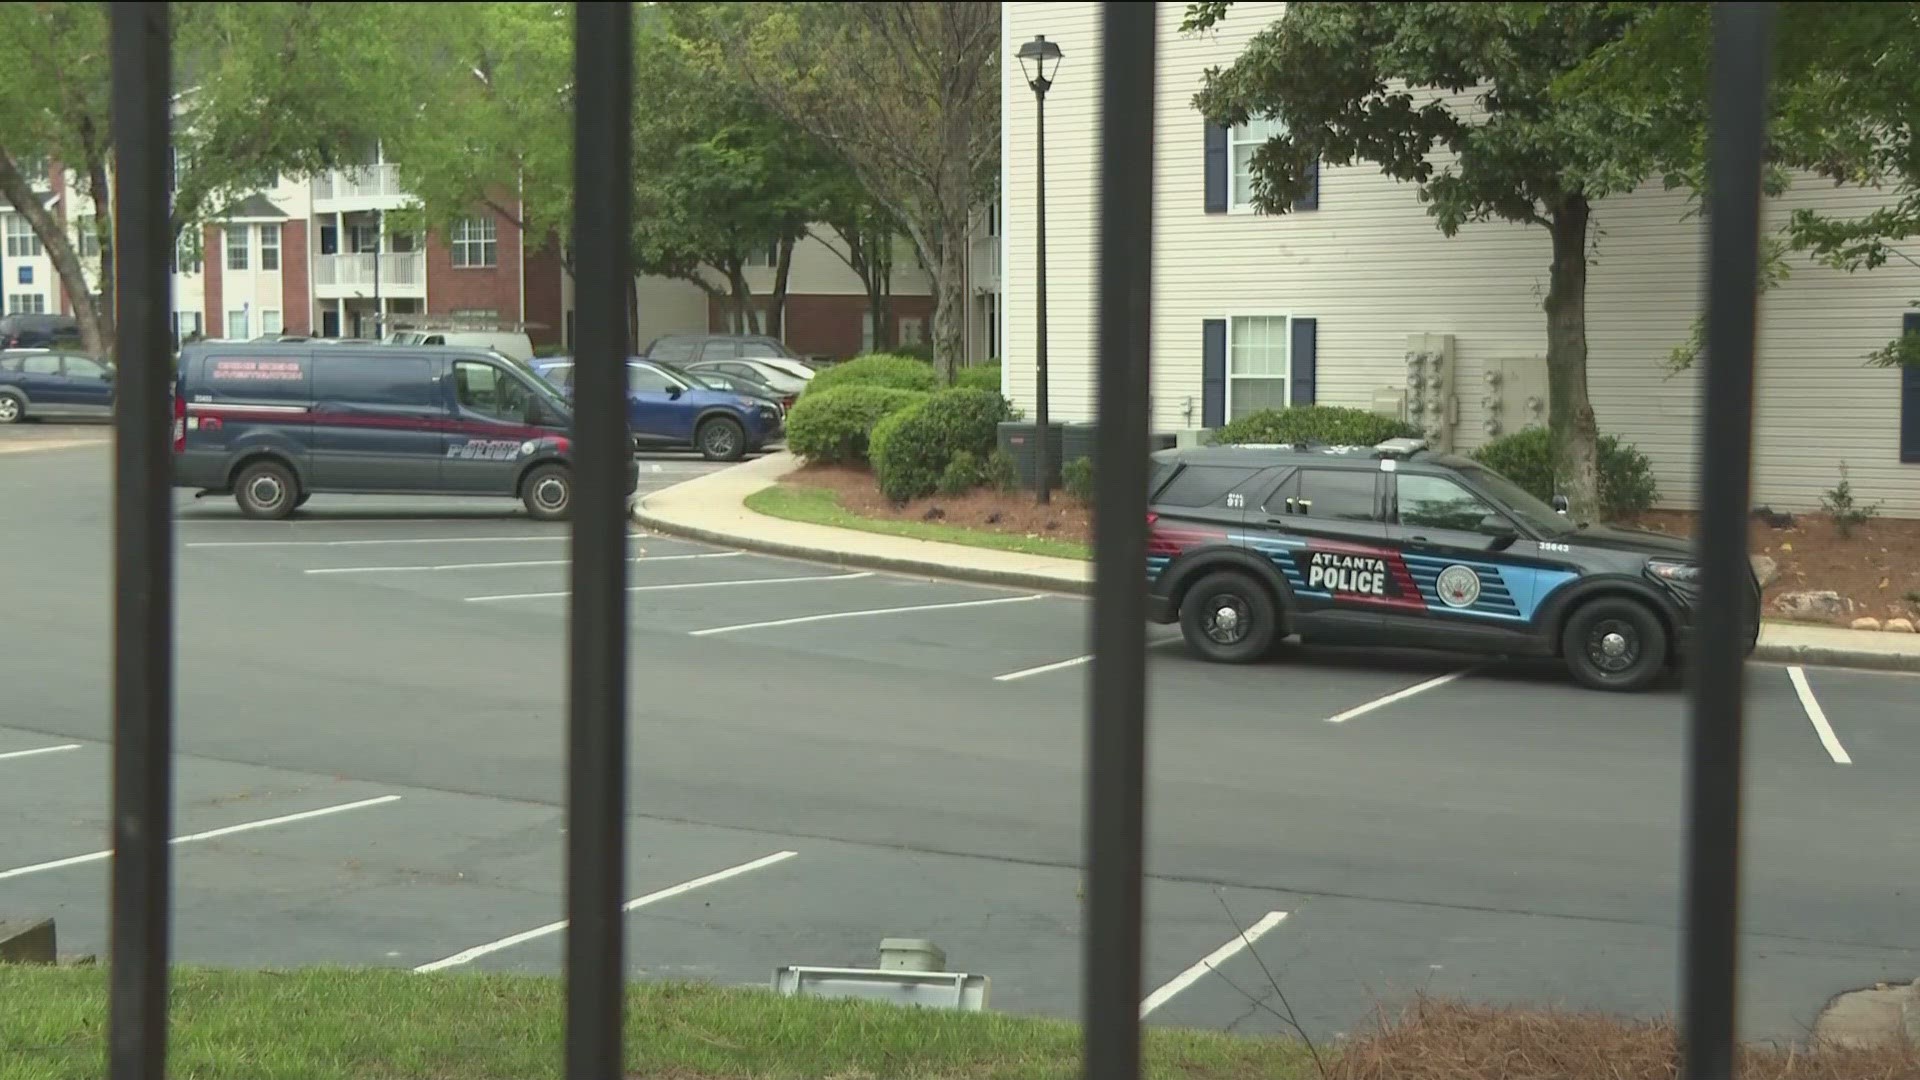 Atlanta Police said it happened at an apartment complex on Maple Drive.